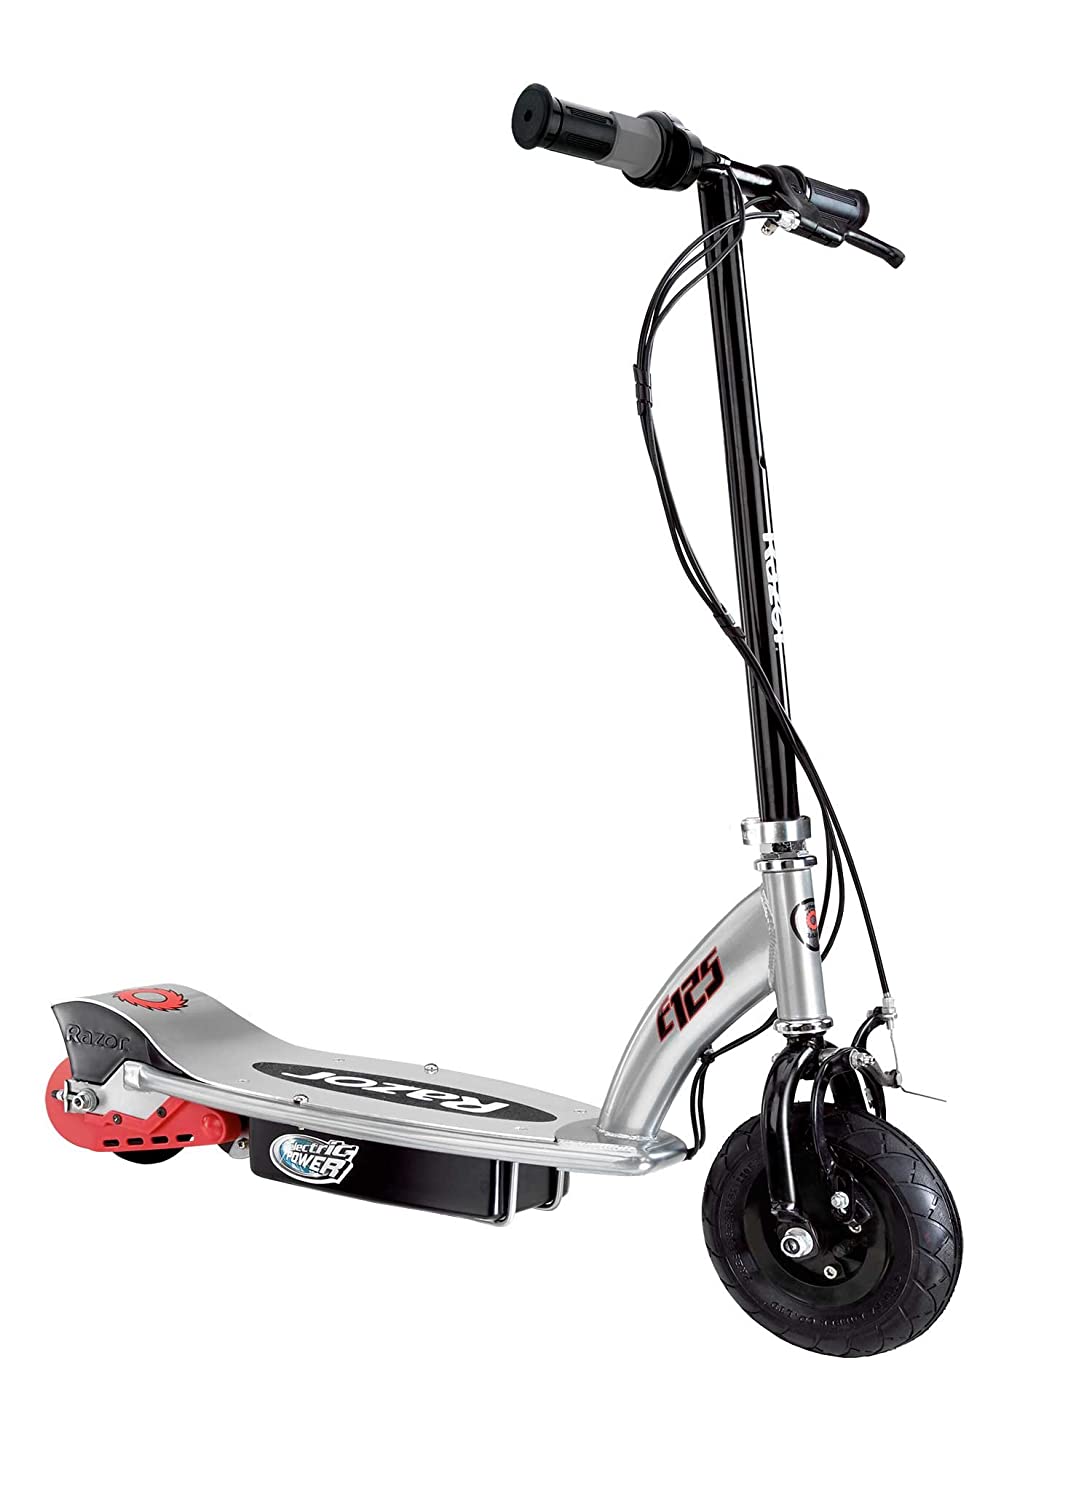 Top 10 Best Electric Scooters For Kids & Reviews in 2022 1